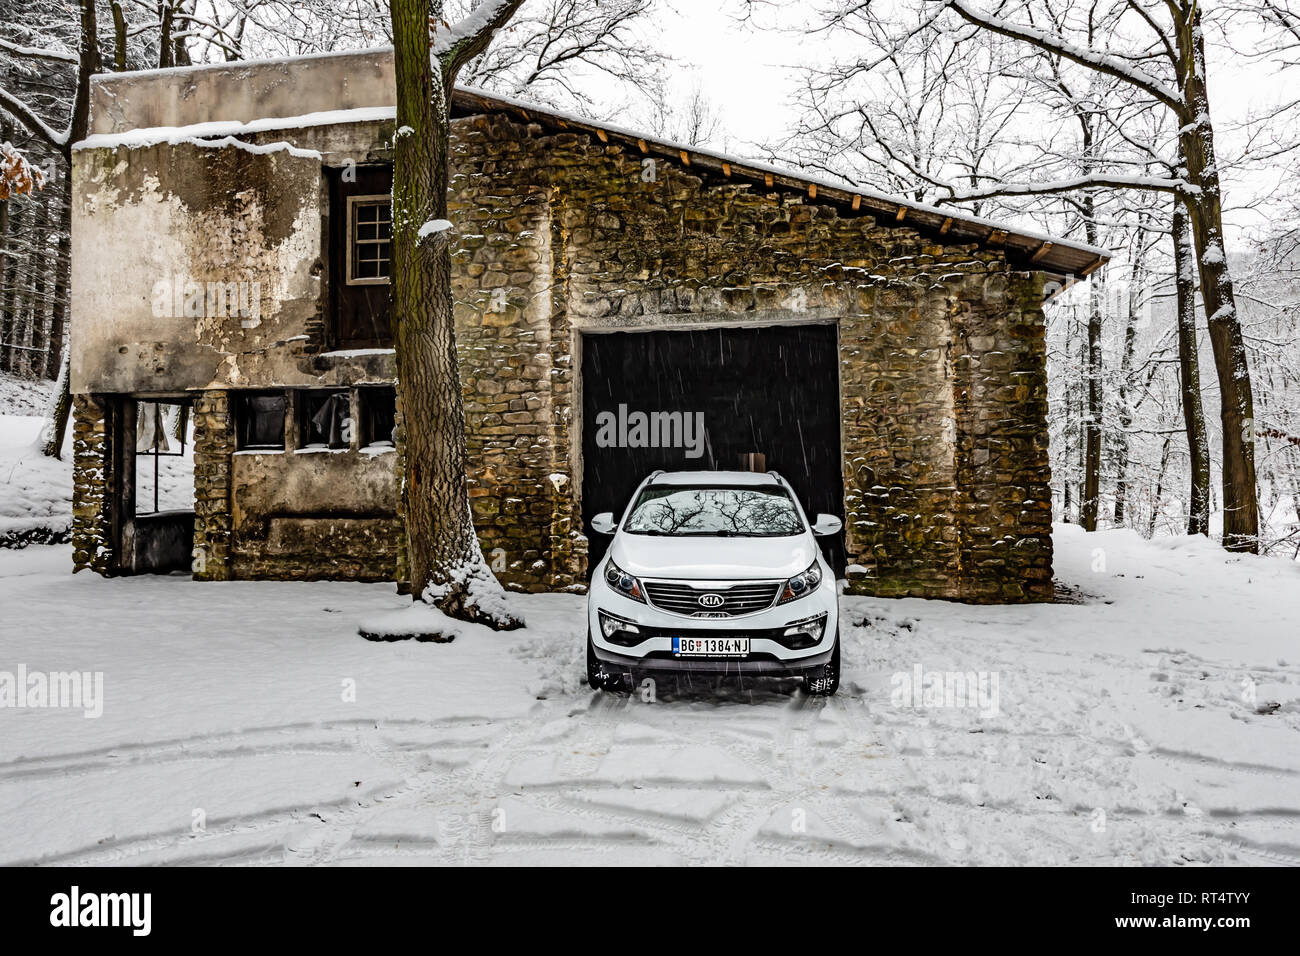 Kia Sportage 2.0 CRDI awd or 4x4, white color, near the abandoned garage in a forest, covered with deep snow and ice. Extreme conditions and temperatu Stock Photo